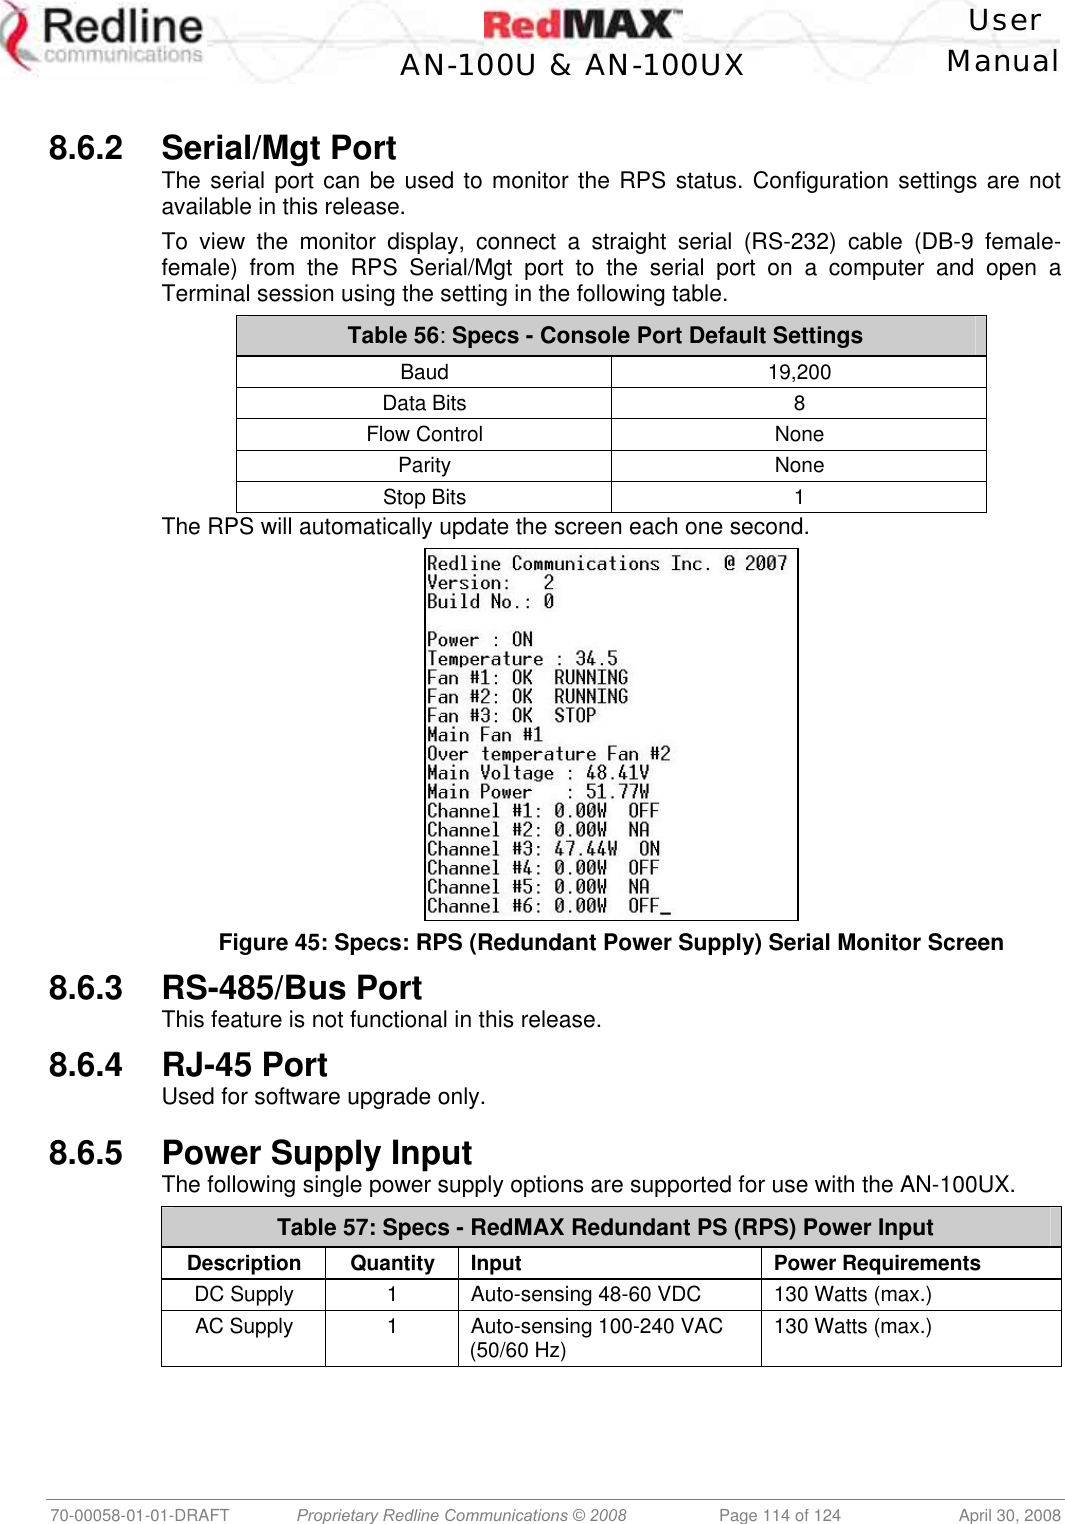    User  AN-100U &amp; AN-100UX Manual   70-00058-01-01-DRAFT  Proprietary Redline Communications © 2008   Page 114 of 124  April 30, 2008   8.6.2 Serial/Mgt Port The serial port can be used to monitor the RPS status. Configuration settings are not available in this release. To view the monitor display, connect a straight serial (RS-232) cable (DB-9 female-female) from the RPS Serial/Mgt port to the serial port on a computer and open a Terminal session using the setting in the following table. Table 56: Specs - Console Port Default Settings Baud 19,200 Data Bits  8 Flow Control  None Parity None Stop Bits  1 The RPS will automatically update the screen each one second.  Figure 45: Specs: RPS (Redundant Power Supply) Serial Monitor Screen 8.6.3 RS-485/Bus Port This feature is not functional in this release. 8.6.4 RJ-45 Port Used for software upgrade only.  8.6.5 Power Supply Input The following single power supply options are supported for use with the AN-100UX. Table 57: Specs - RedMAX Redundant PS (RPS) Power Input Description Quantity Input  Power Requirements DC Supply  1  Auto-sensing 48-60 VDC  130 Watts (max.) AC Supply  1  Auto-sensing 100-240 VAC  (50/60 Hz)  130 Watts (max.)  